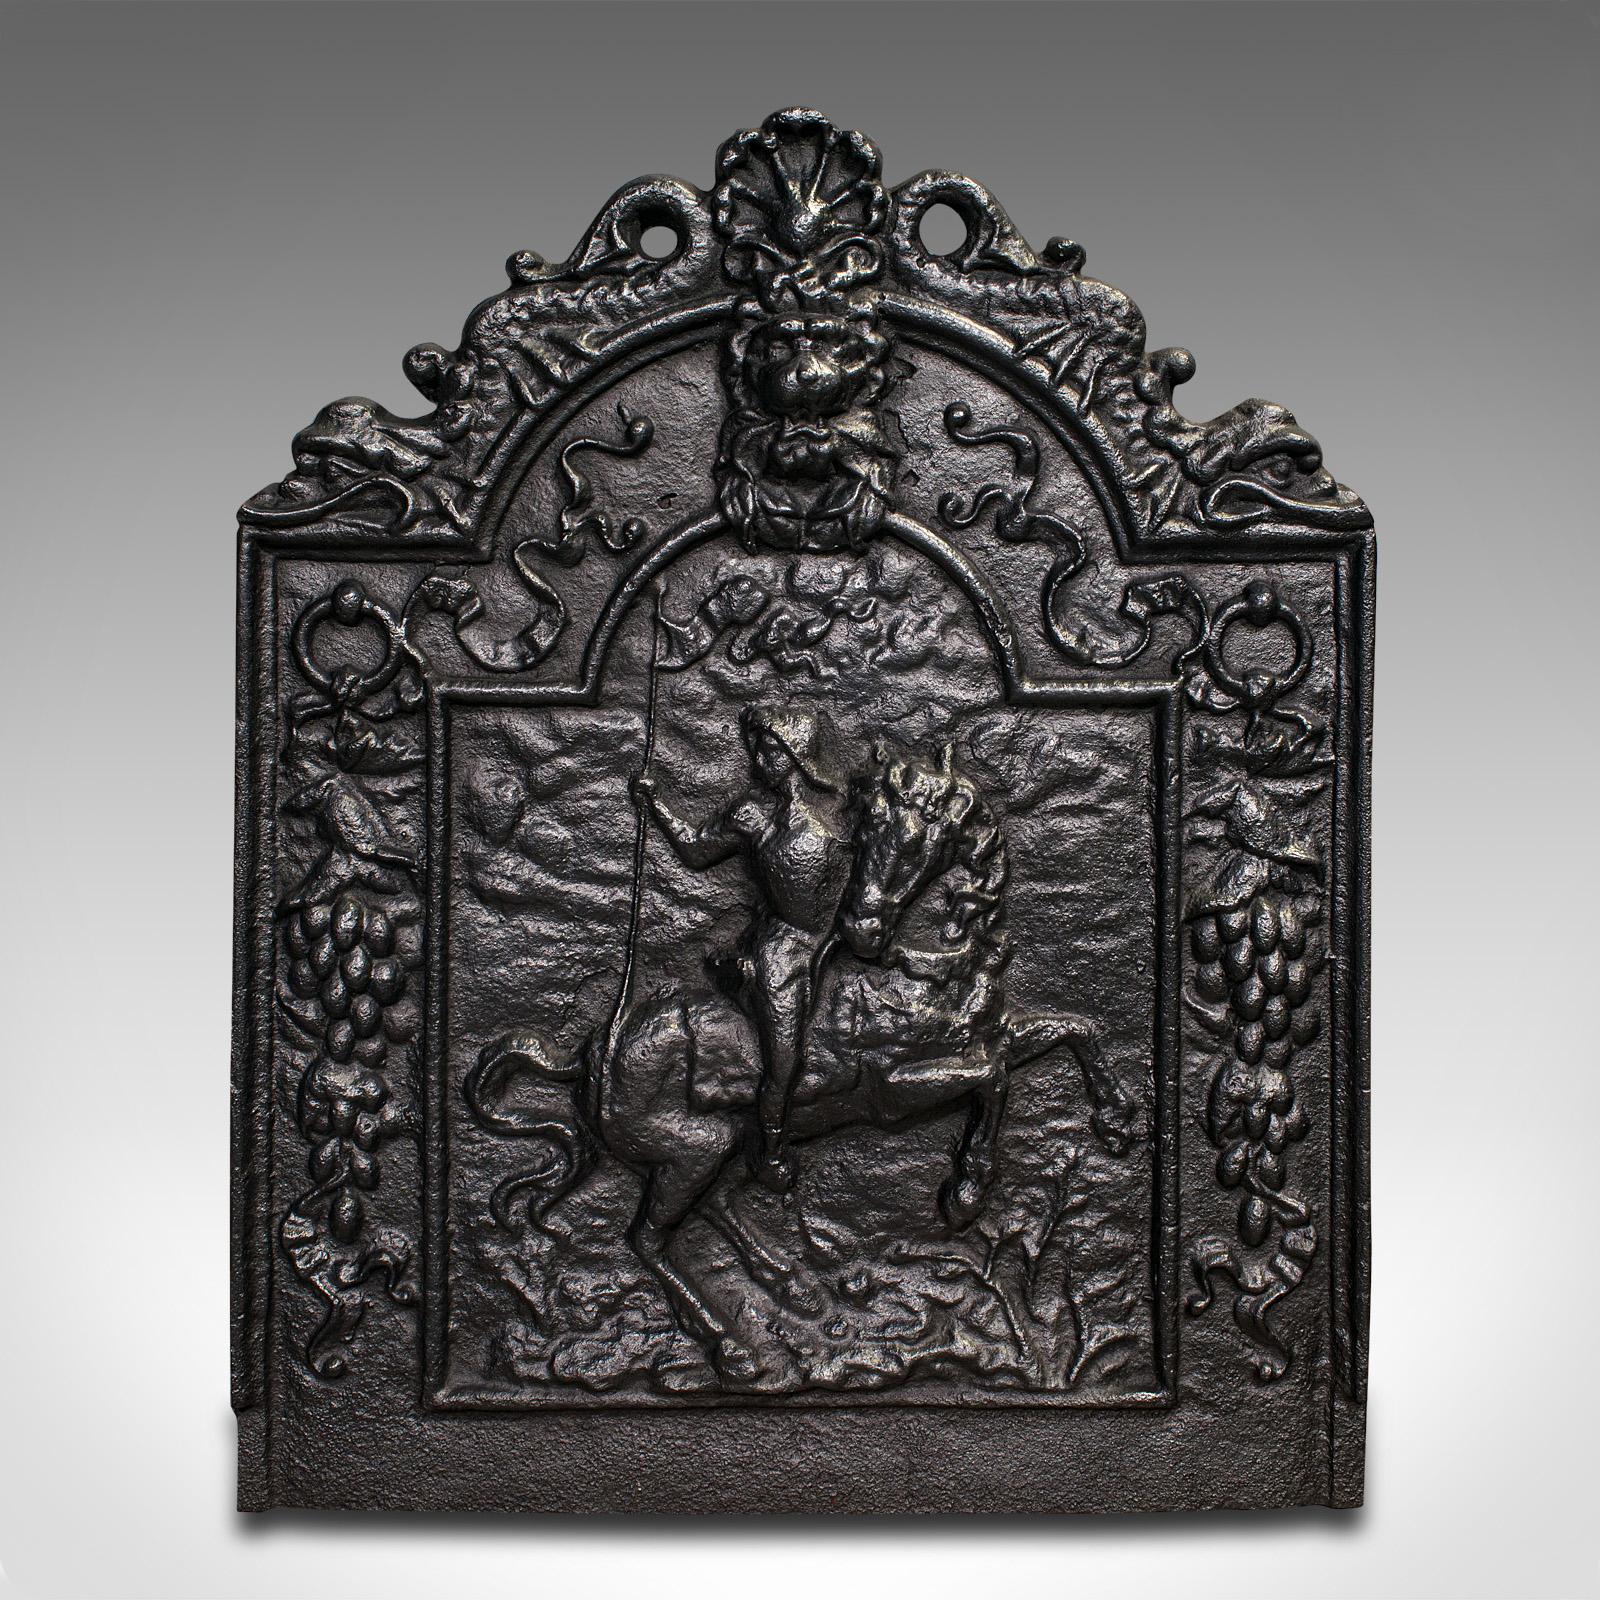 This is an antique decorative fire back. An English, cast iron fireplace backrest, dating to the late Victorian period, circa 1900.

Pleasingly cast with a mounted rider and old English motif
Displays a desirable aged patina throughout
Cast iron